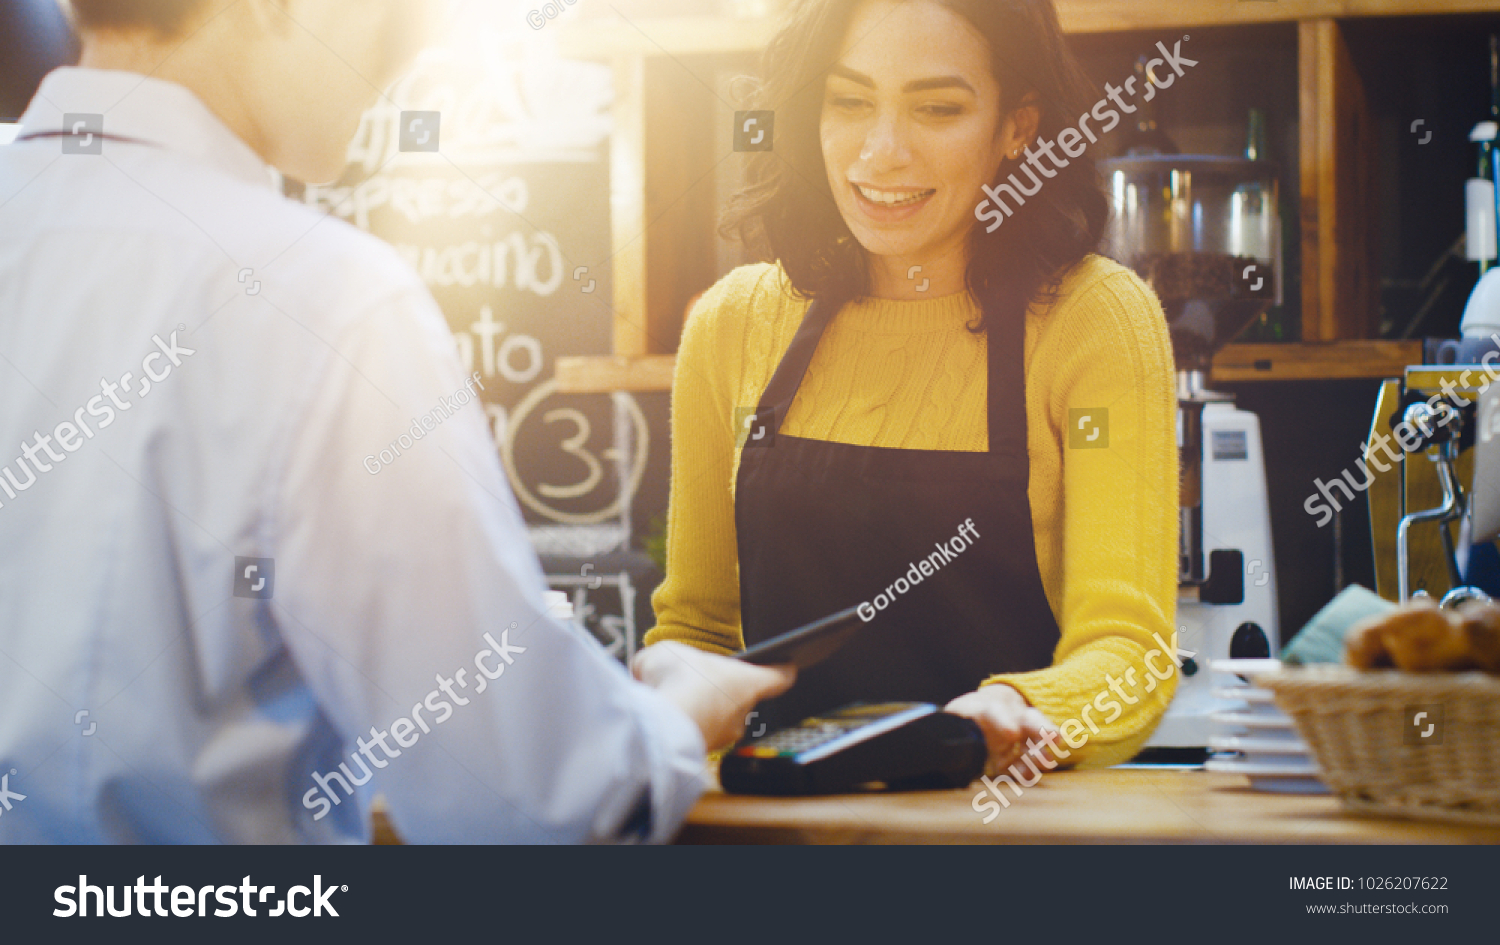 In the Cafe Beautiful Hispanic Woman Makes Takeaway Coffee For a Customer Who Pays by Contactless Mobile Phone to Credit Card System. #1026207622